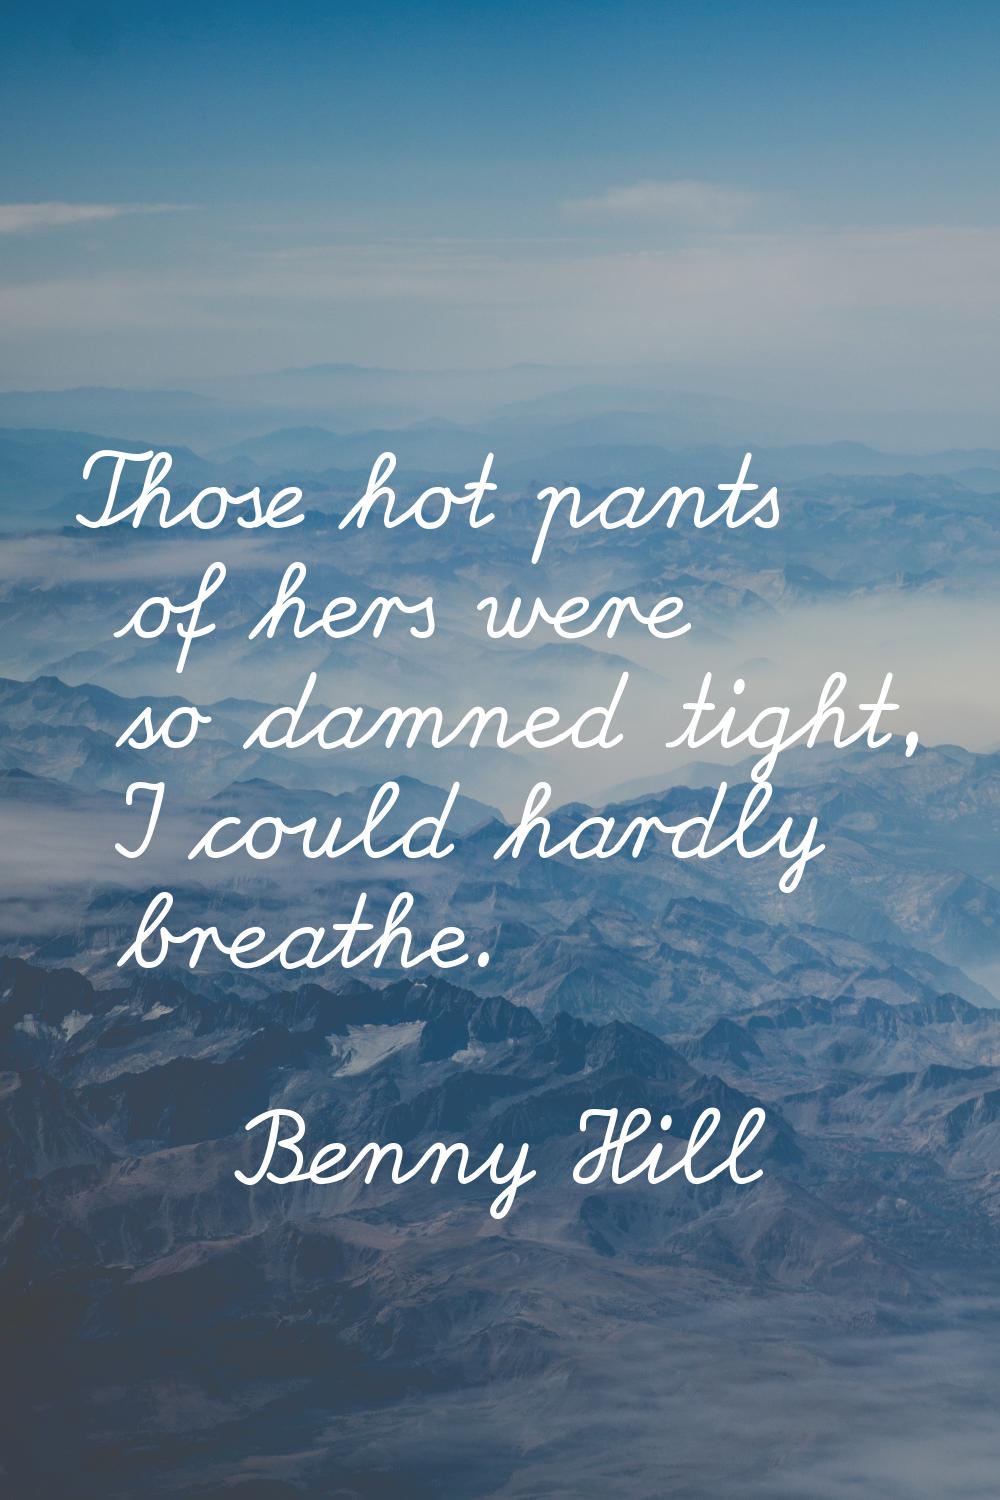 Those hot pants of hers were so damned tight, I could hardly breathe.